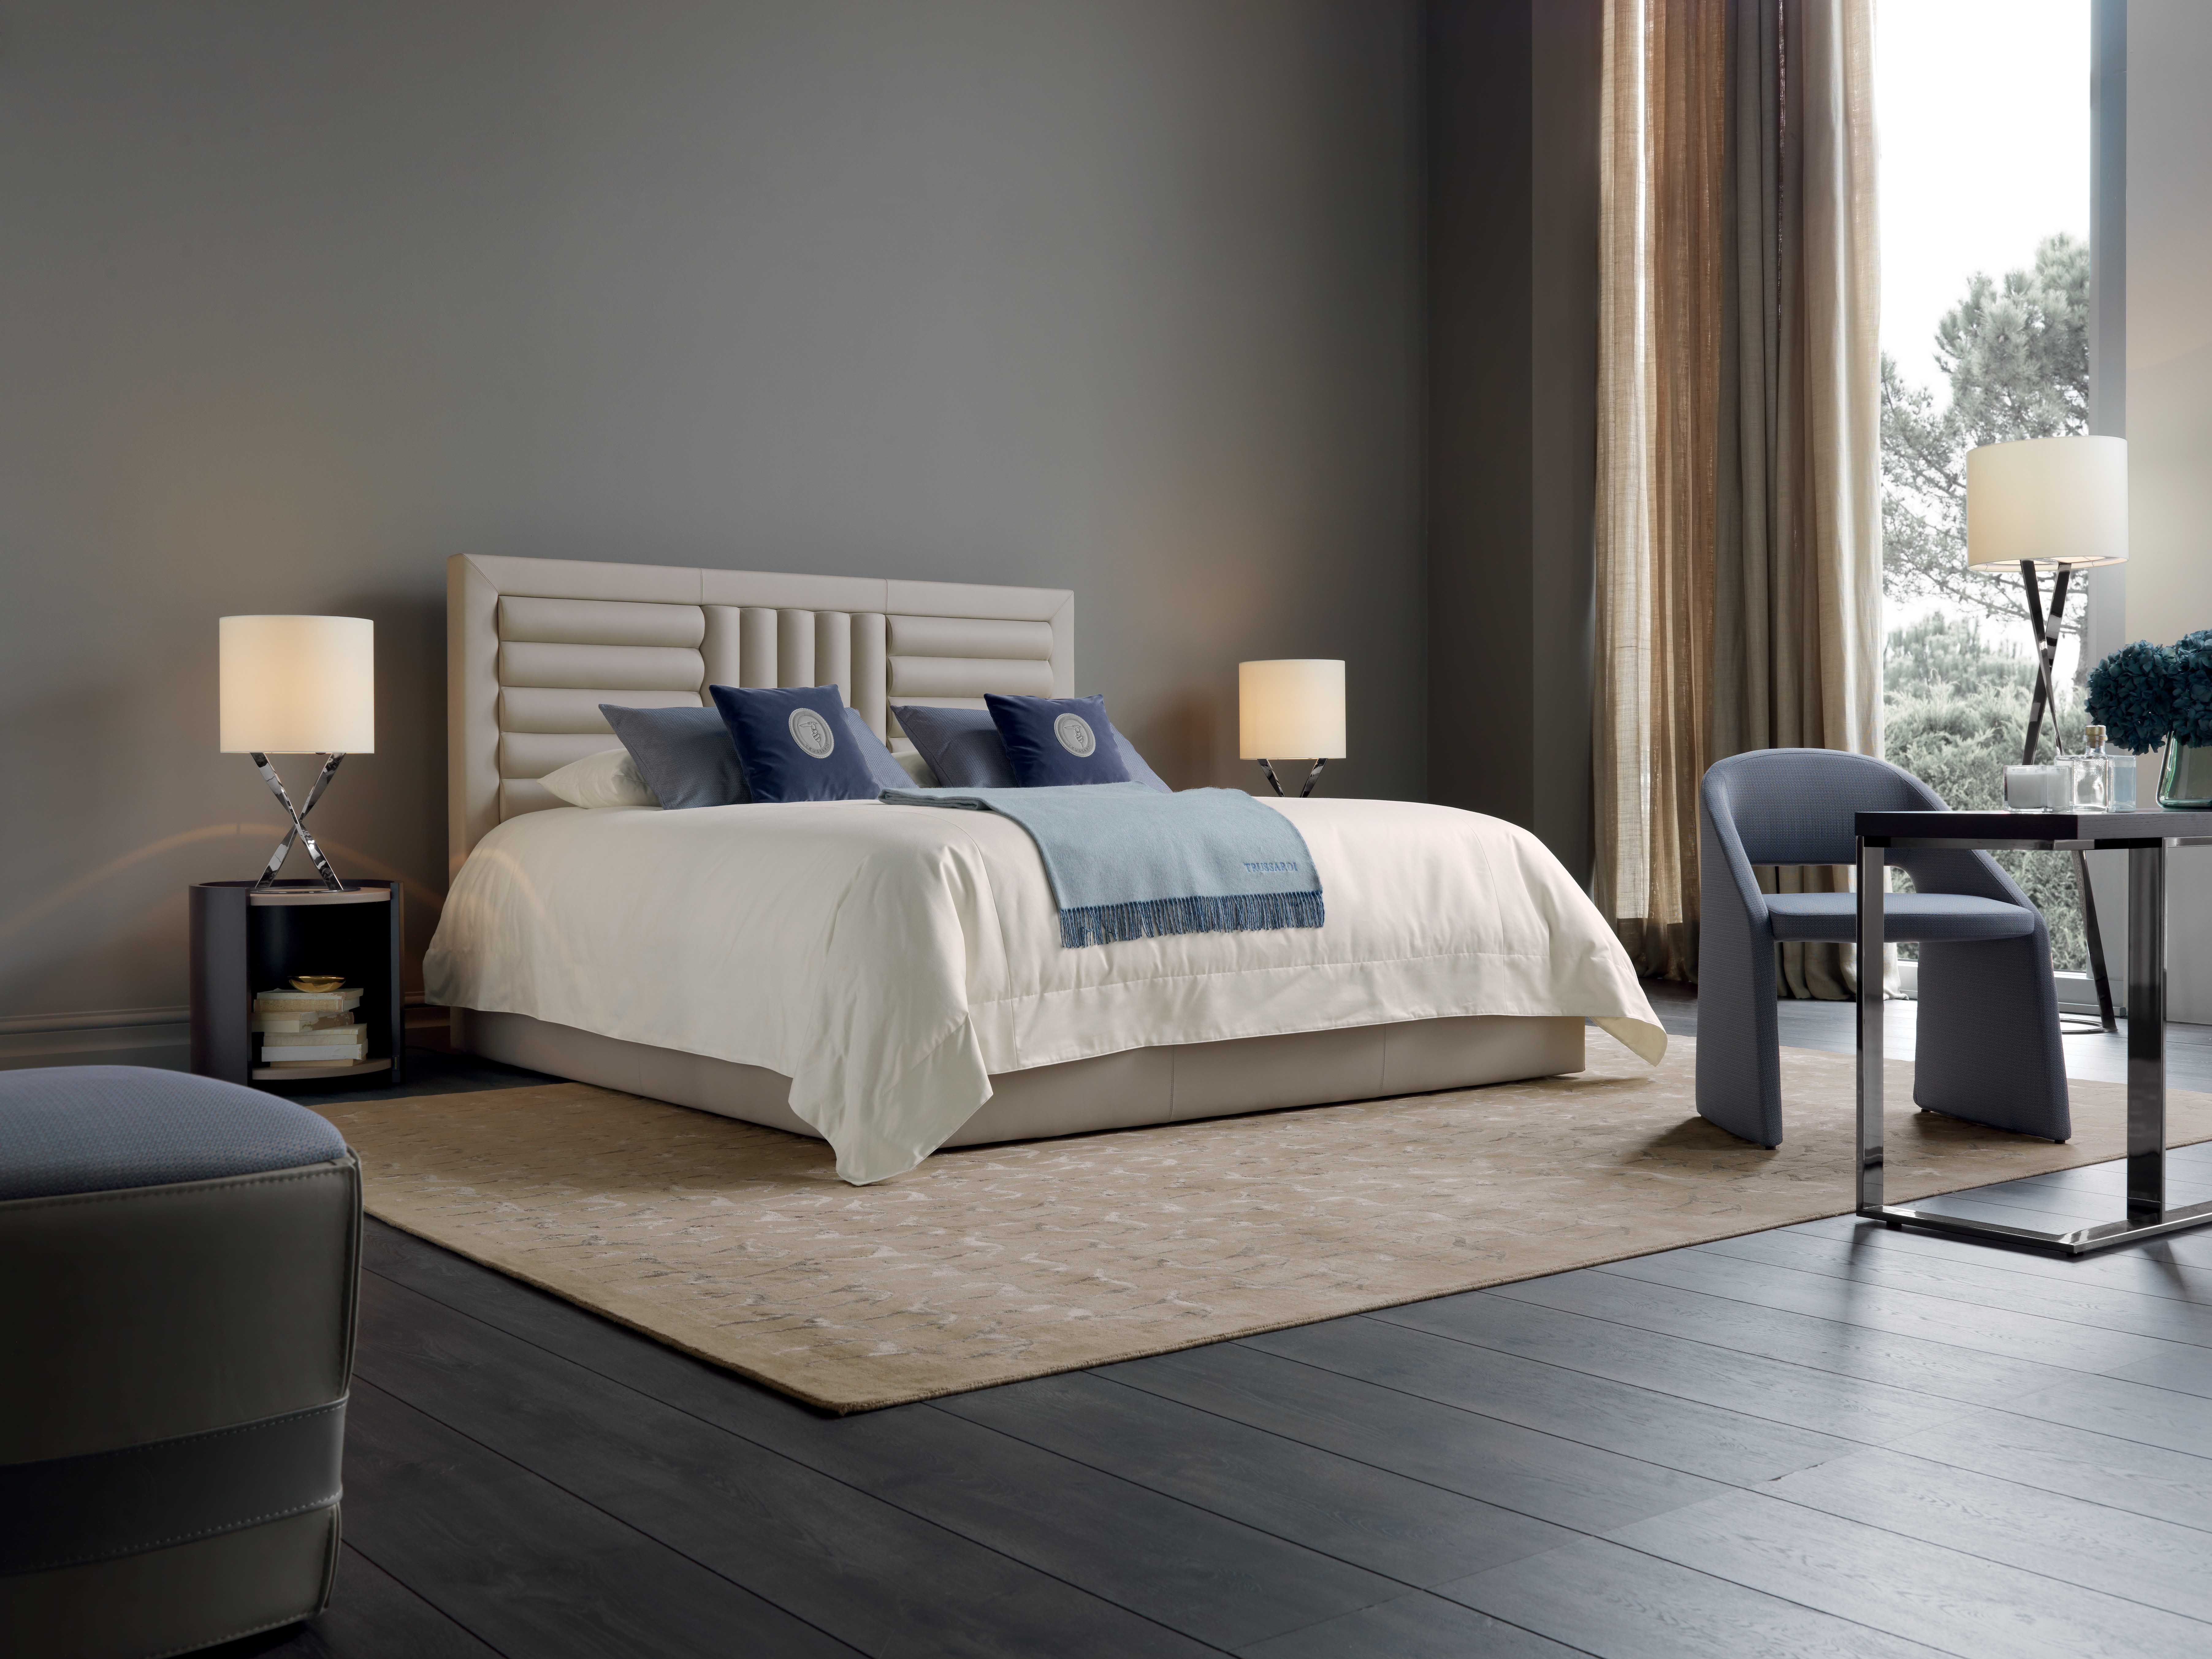 Trussardi Relief bed, Isla bedside tables, Spiga table lamp